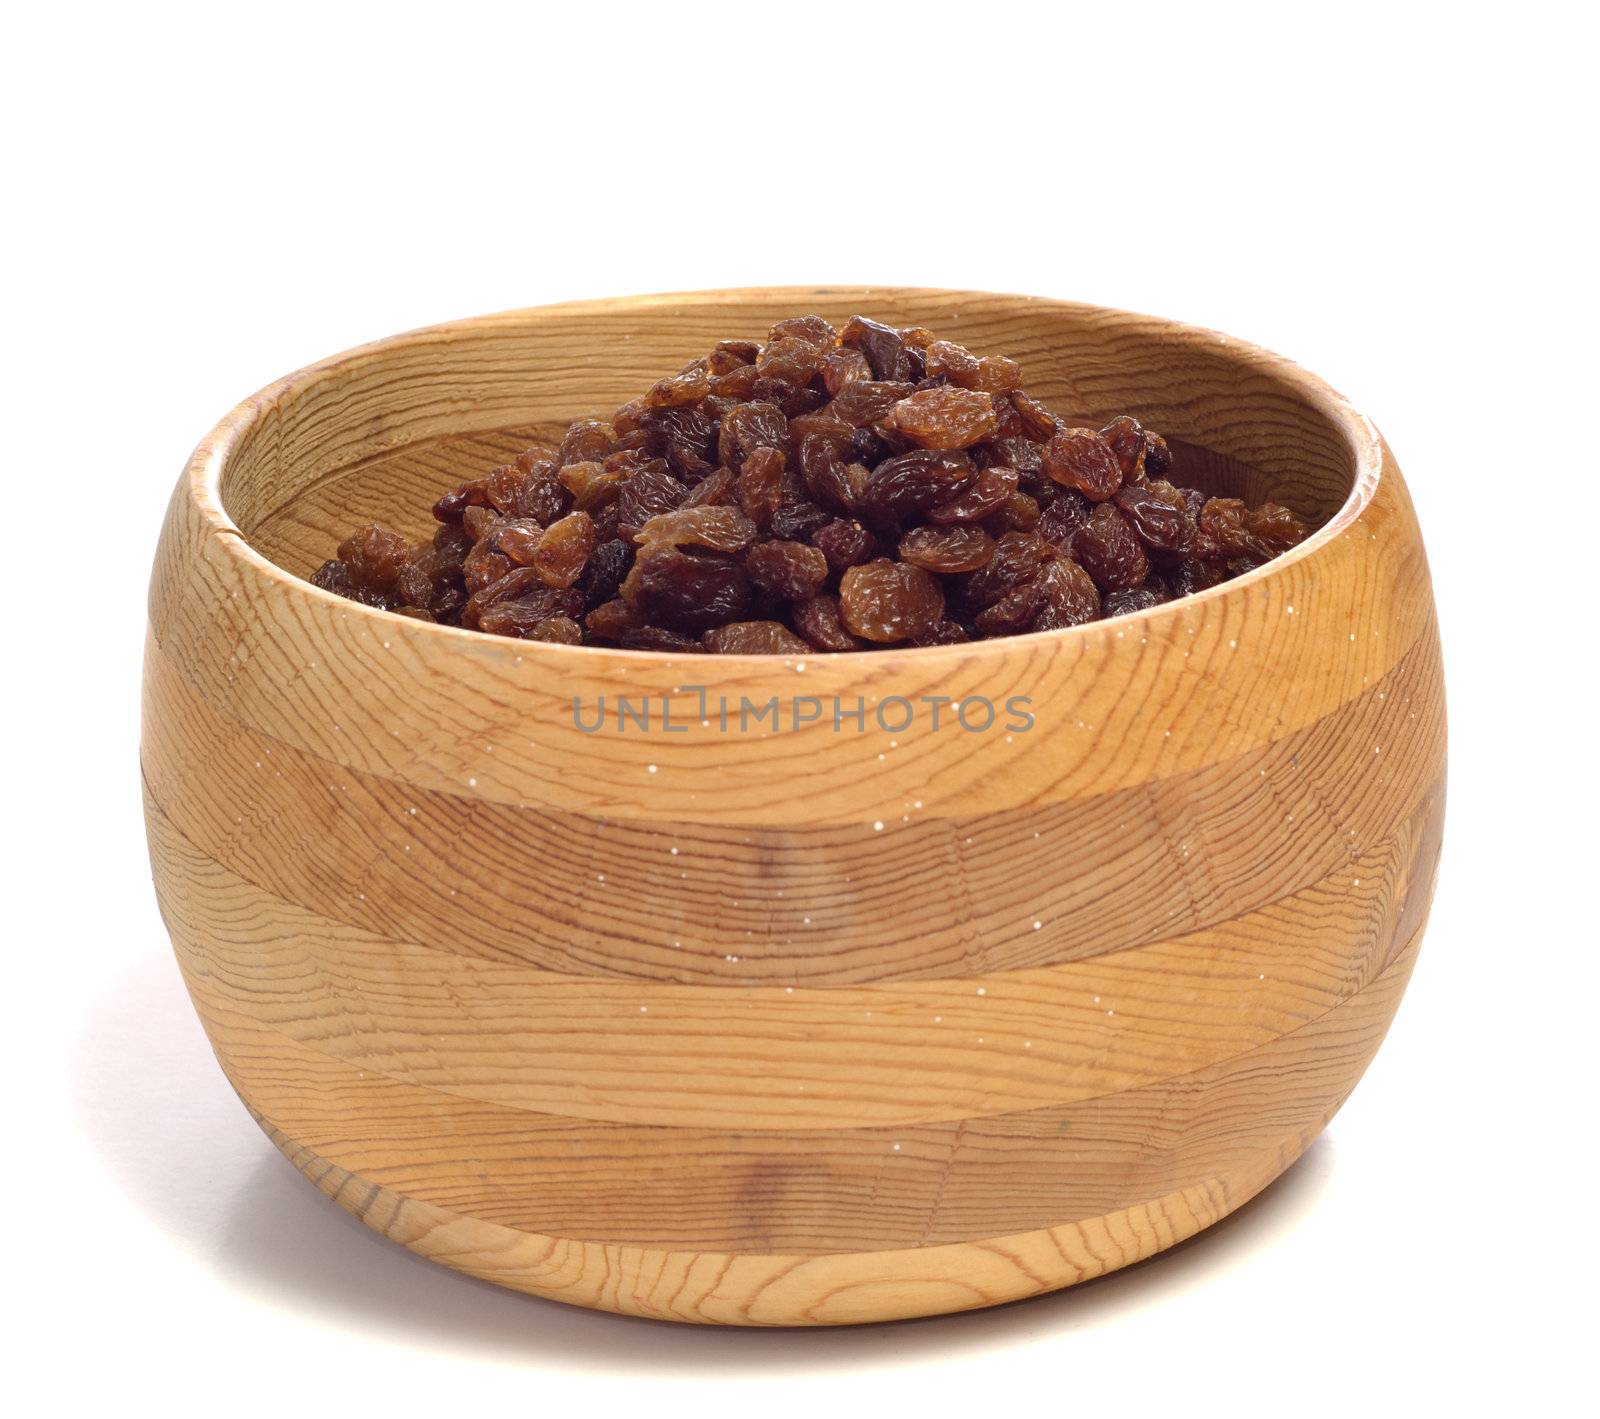 A pile of raisins in a wooden bowl, isolated against a white background